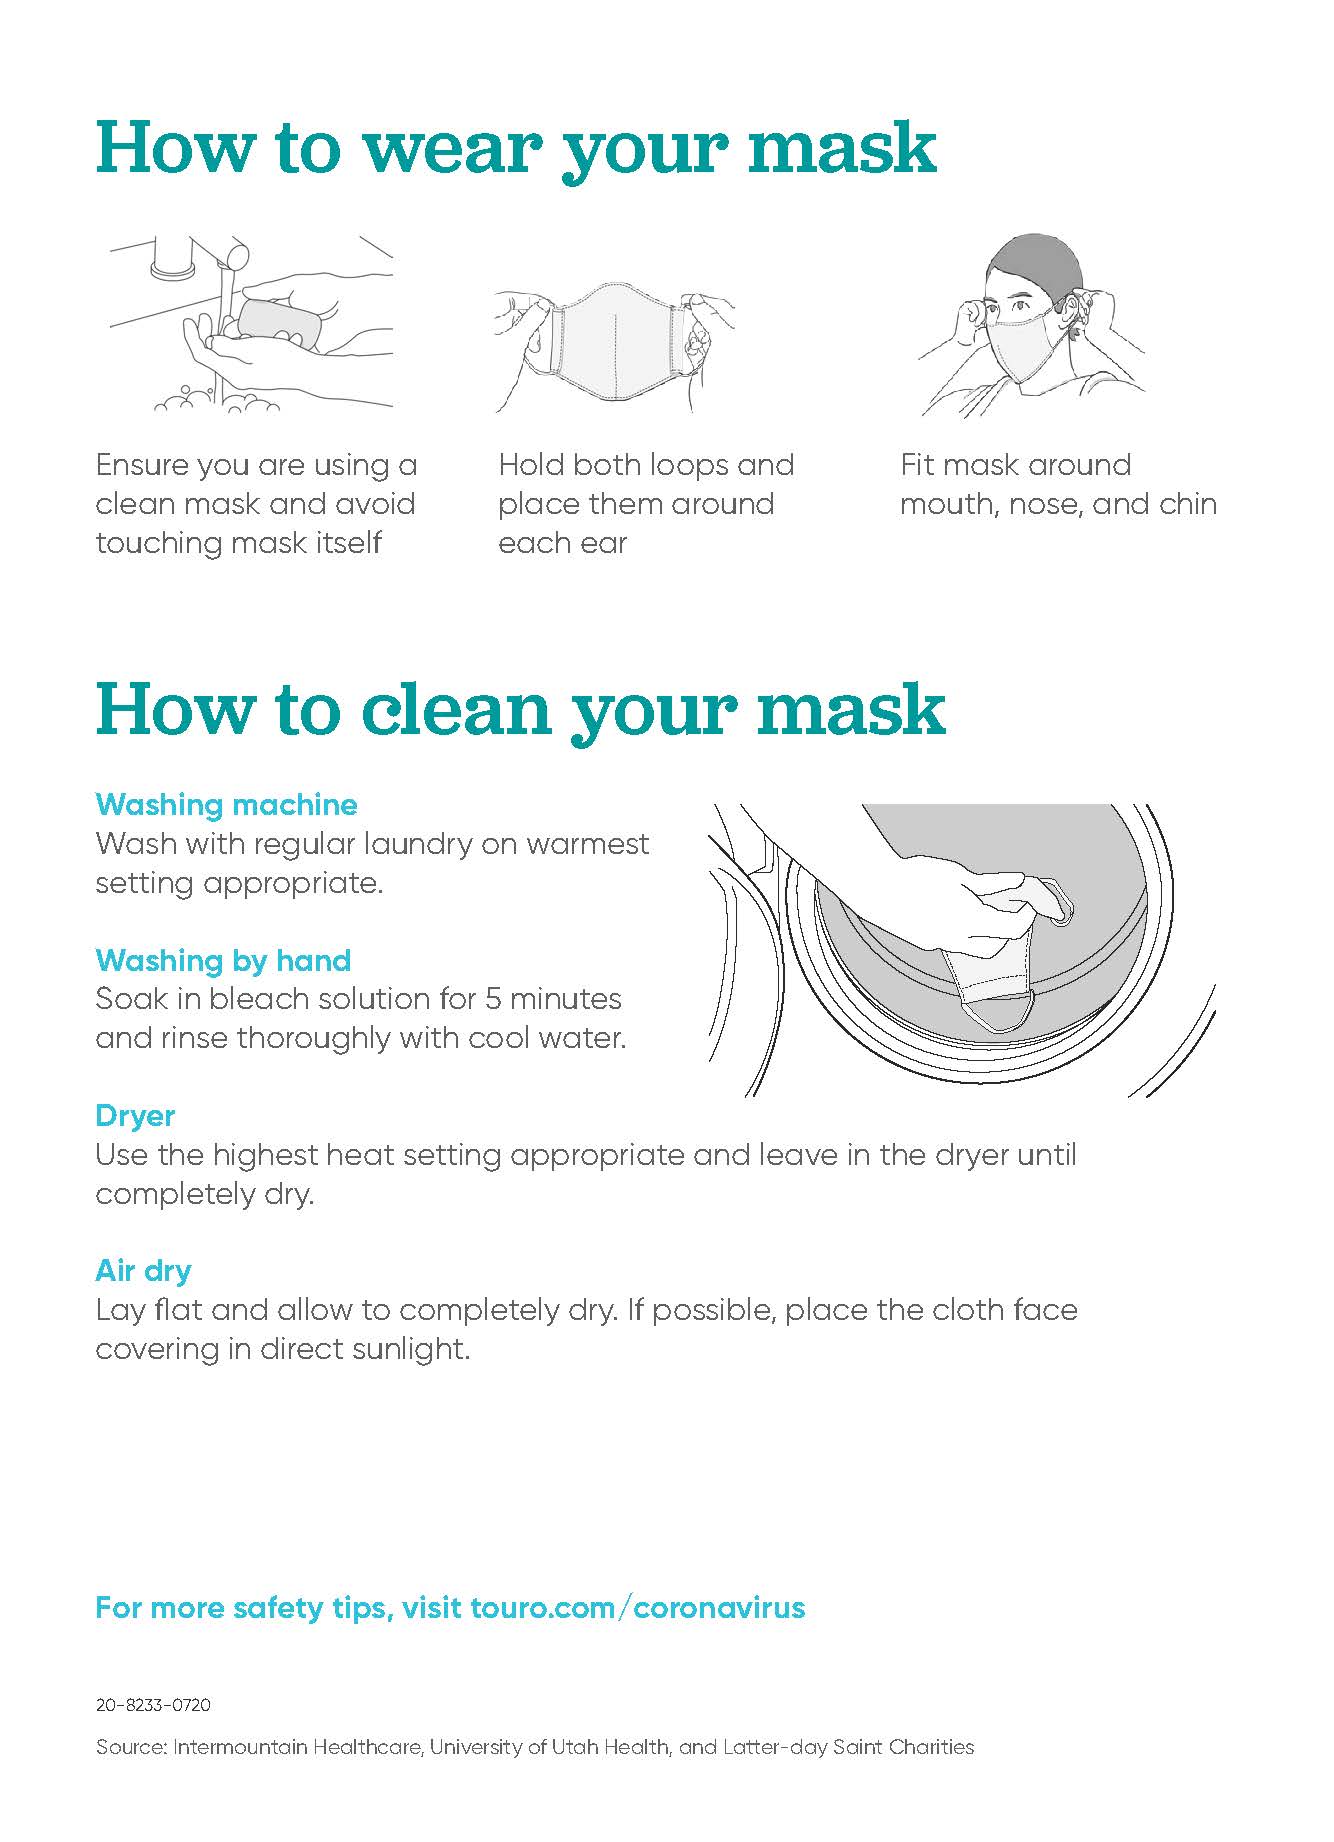 Face mask instructional infographic